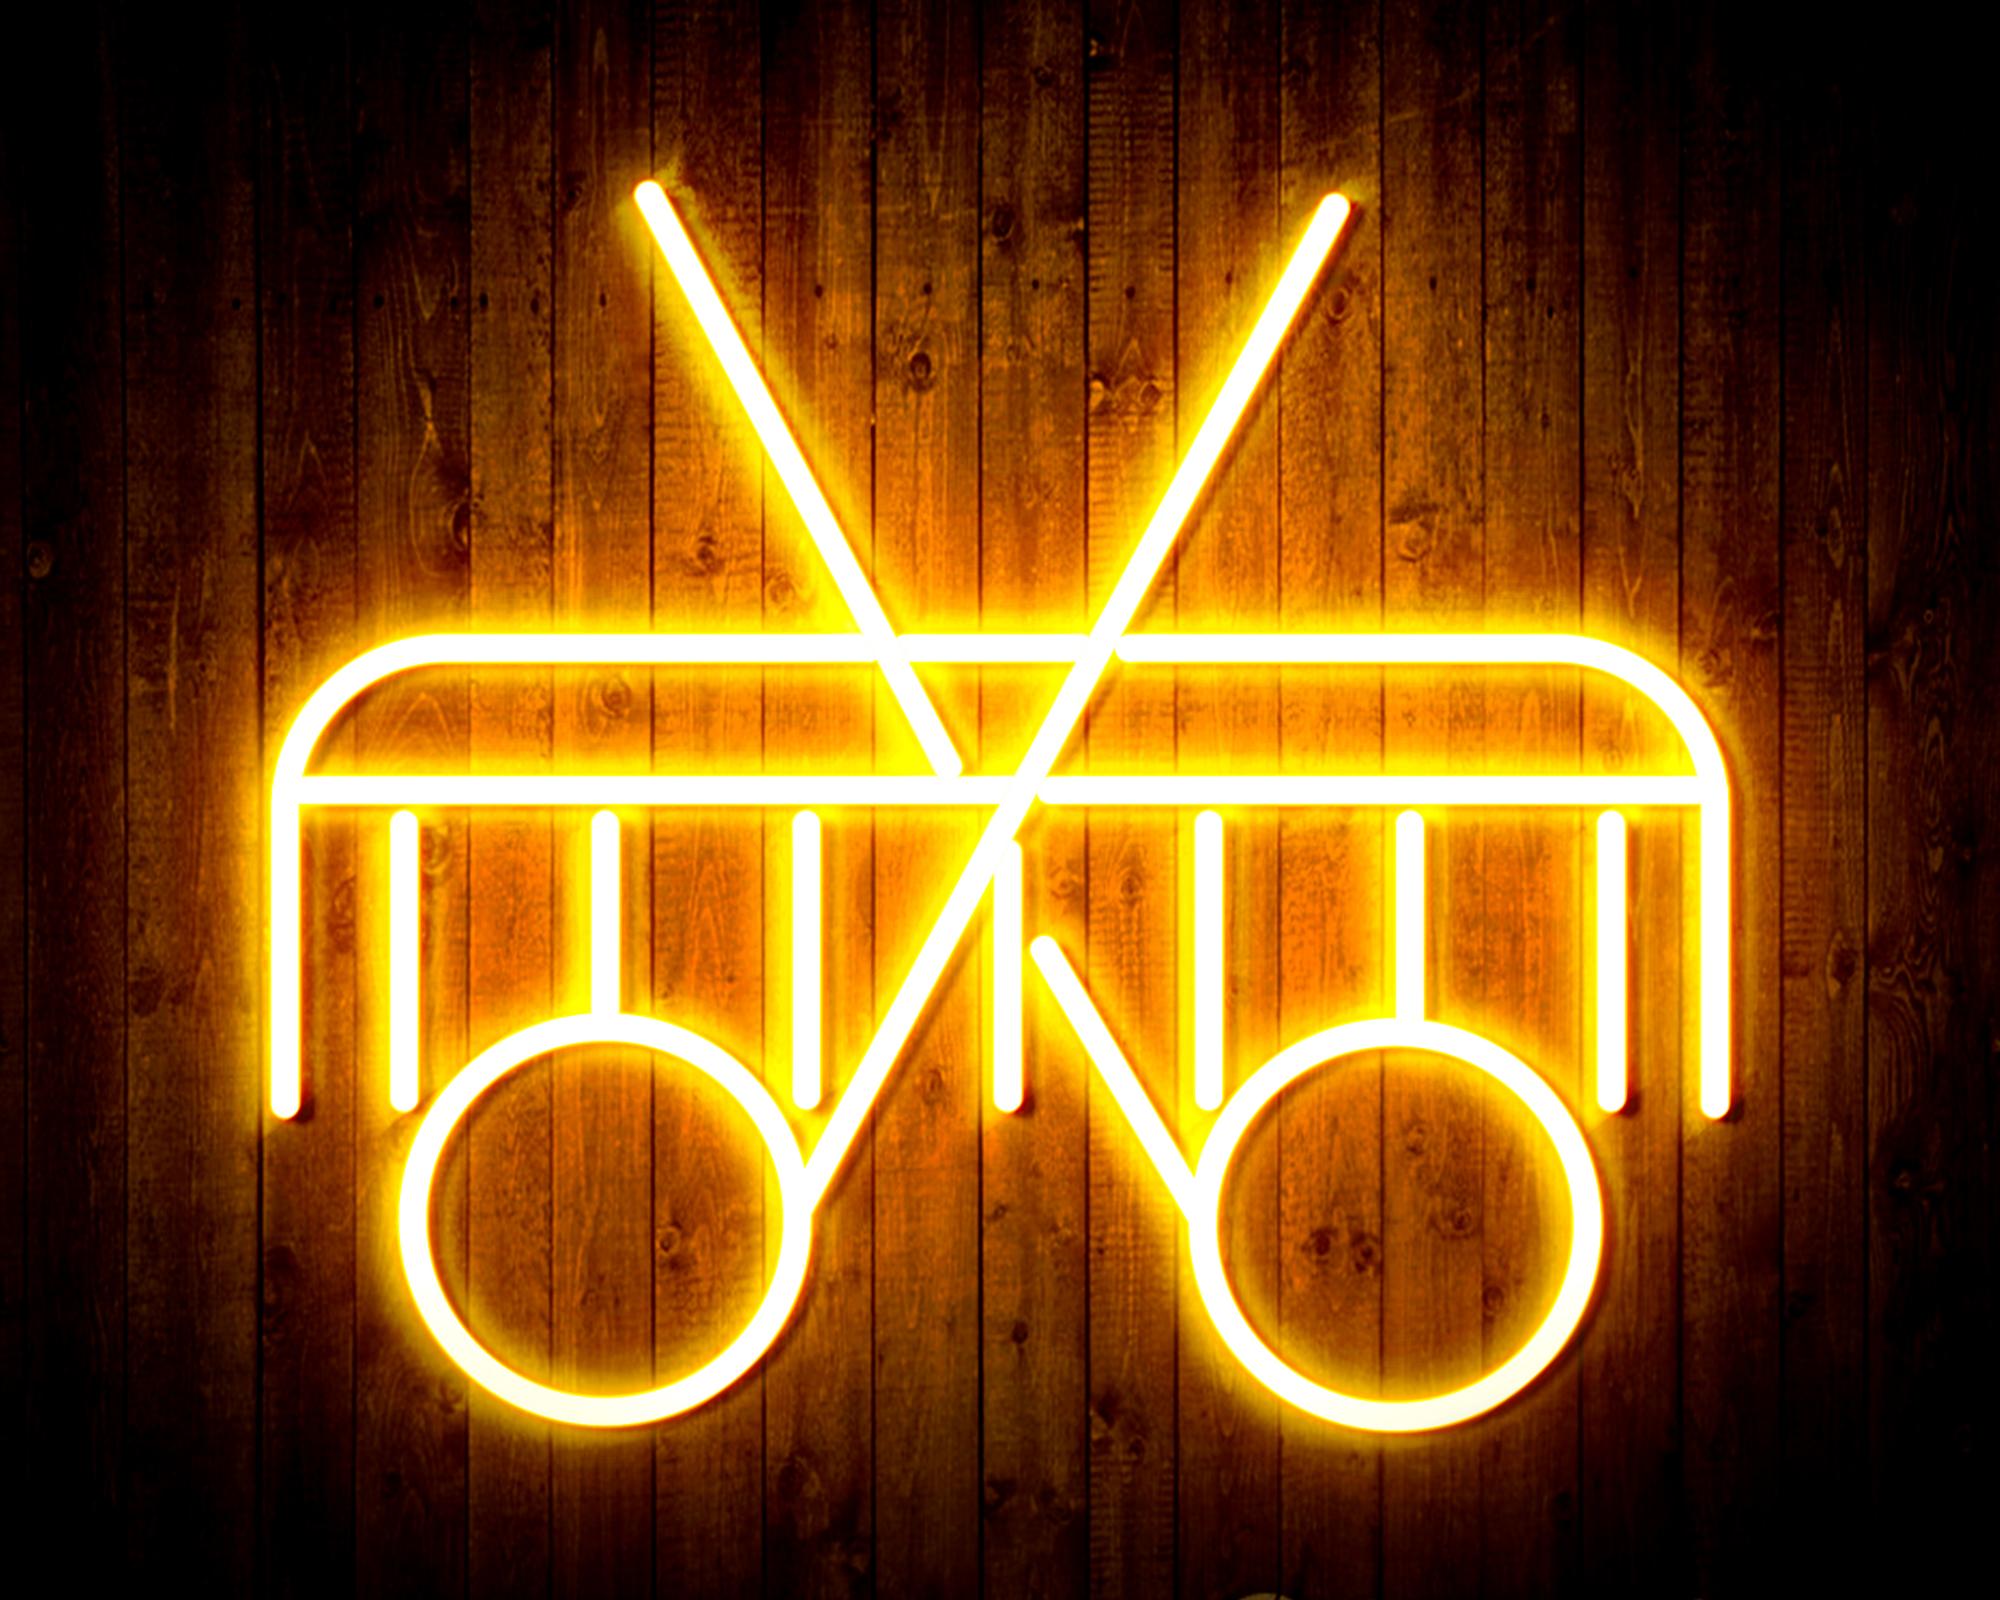 Scissors and Comb LED Neon Sign Wall Light